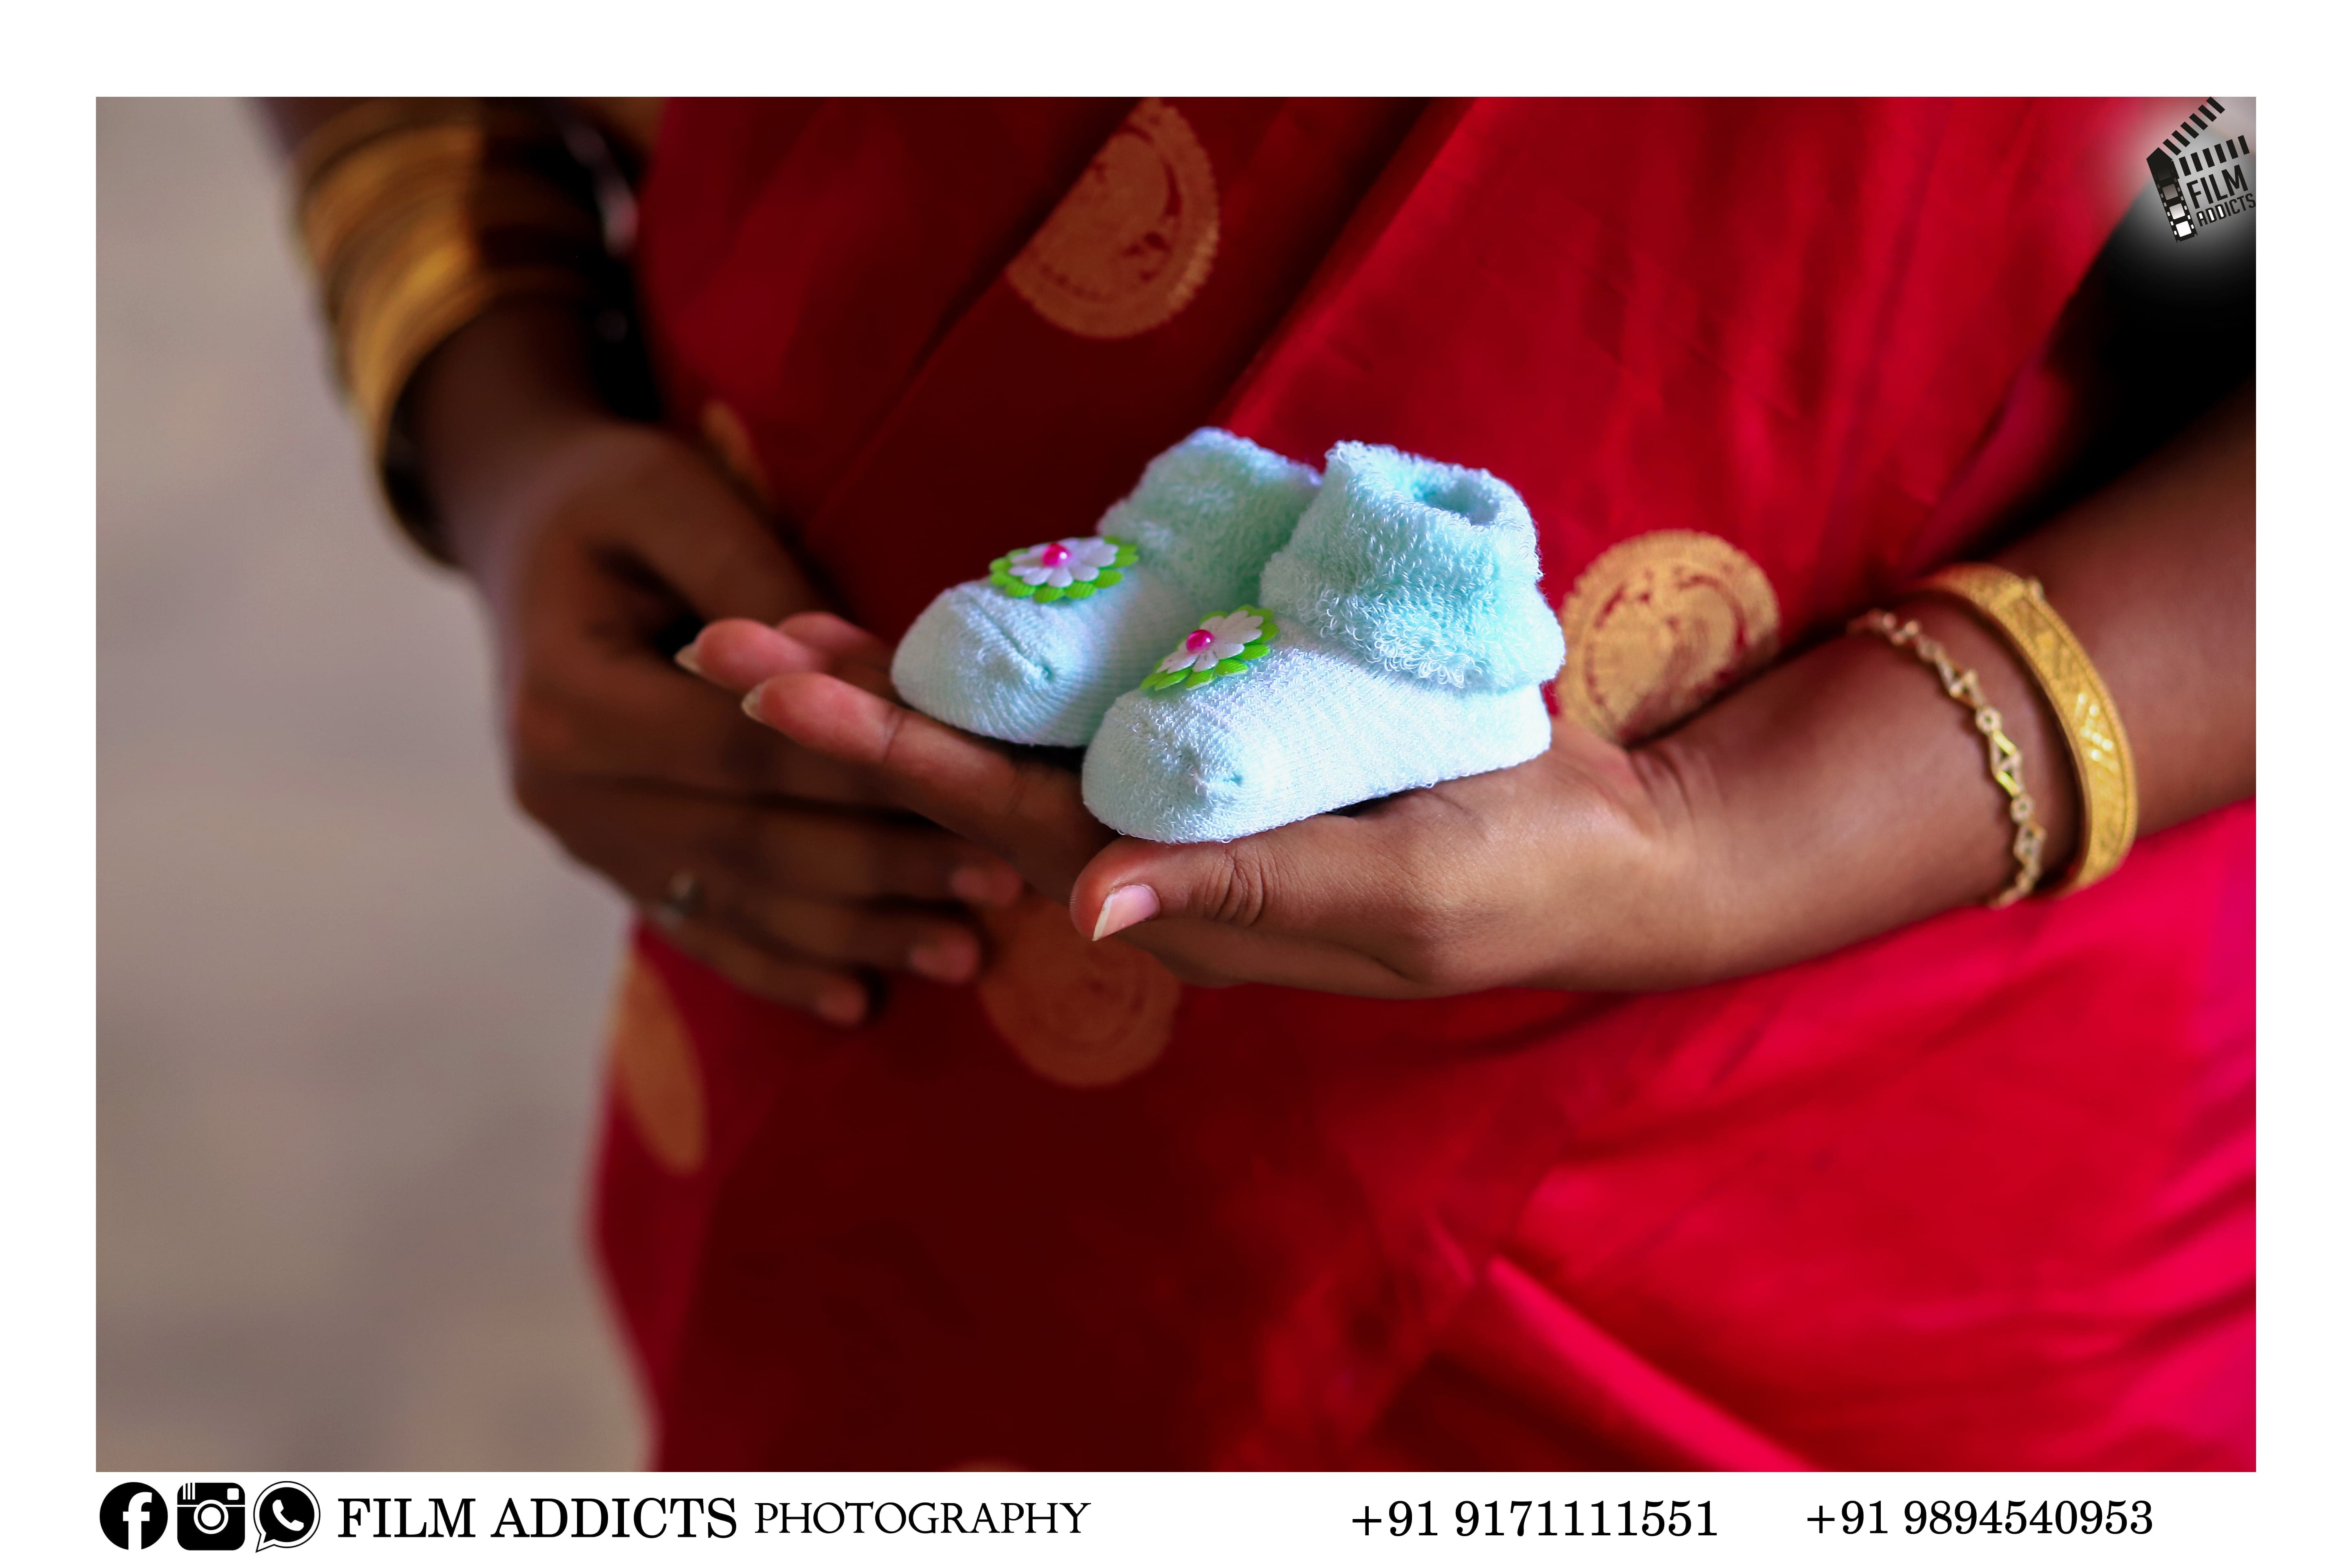 Best Maternity photographers in Trichy,Best Maternity photography in Trichy,Baby Shower Photography In Trichy,Baby Shower Photographers In Trichy,Best candid photographers in Trichy,Best candid photography in Trichy,Best marriage photographers in Trichy,Best marriage photography in Trichy,Best photographers in Trichy,Best photography in Trichy,Best Maternity candid photography in Trichy,Best Maternity candid photographers in Trichy,Best Maternity video in Trichy,Best Maternity videographers in Trichy,Best Maternity videography in Trichy,Best candid videographers in Trichy,Best candid videography in Trichy,Best marriage videographers in Trichy,Best marriage videography in Trichy,Best videographers in Trichy,Best videography in Trichy,Best Maternity candid videography in Trichy,Best Maternity candid videographers in Trichy,Best helicam operators in Trichy,Best drone operators in Trichy,Best Maternity studio in Trichy,Best Maternity photographers in Trichy,Best Maternity photography in Trichy,No.1 Maternity photographers in Trichy,No.1 Maternity photography in Trichy,Trichy Maternity photographers,Trichy Maternity photography,Trichy Maternity videos,Best candid videos in Trichy,Best candid photos in Trichy,Best helicam operators photography in Trichy,Best helicam operator photographers in Trichy,Best Maternity videography in Trichy,Best Maternity photography in Trichy,Best Maternity photography in Trichy,Best Maternity photographers in Trichy,Best drone operators photographers in Trichy,Best Maternity candid videography in Trichy,tamilnadu Maternity photography, tamilnadu.